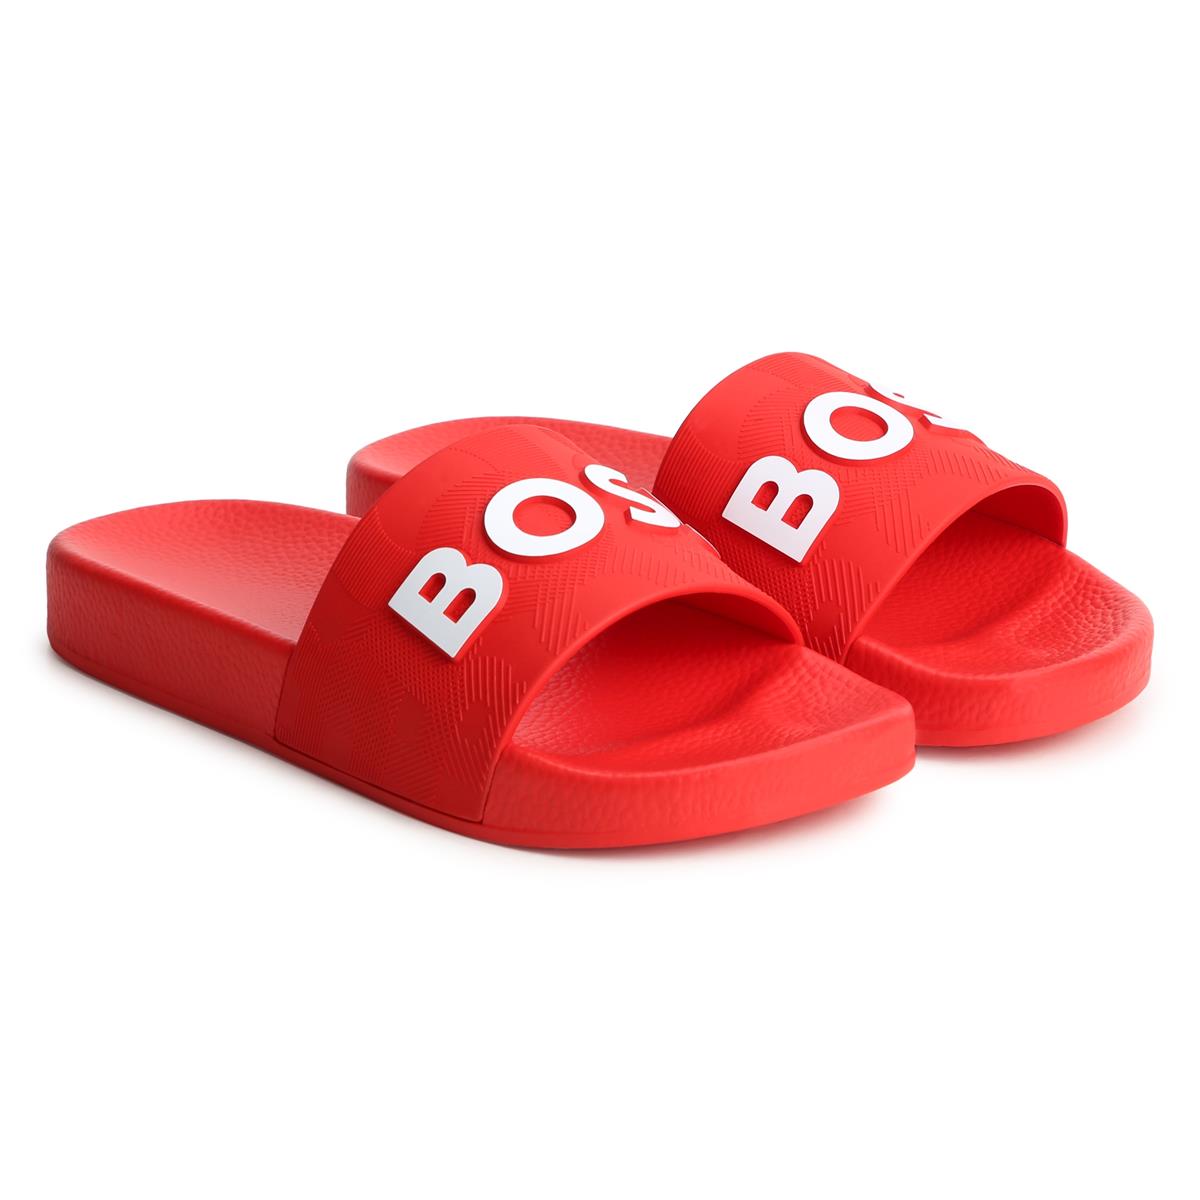 Boys Red Slippers